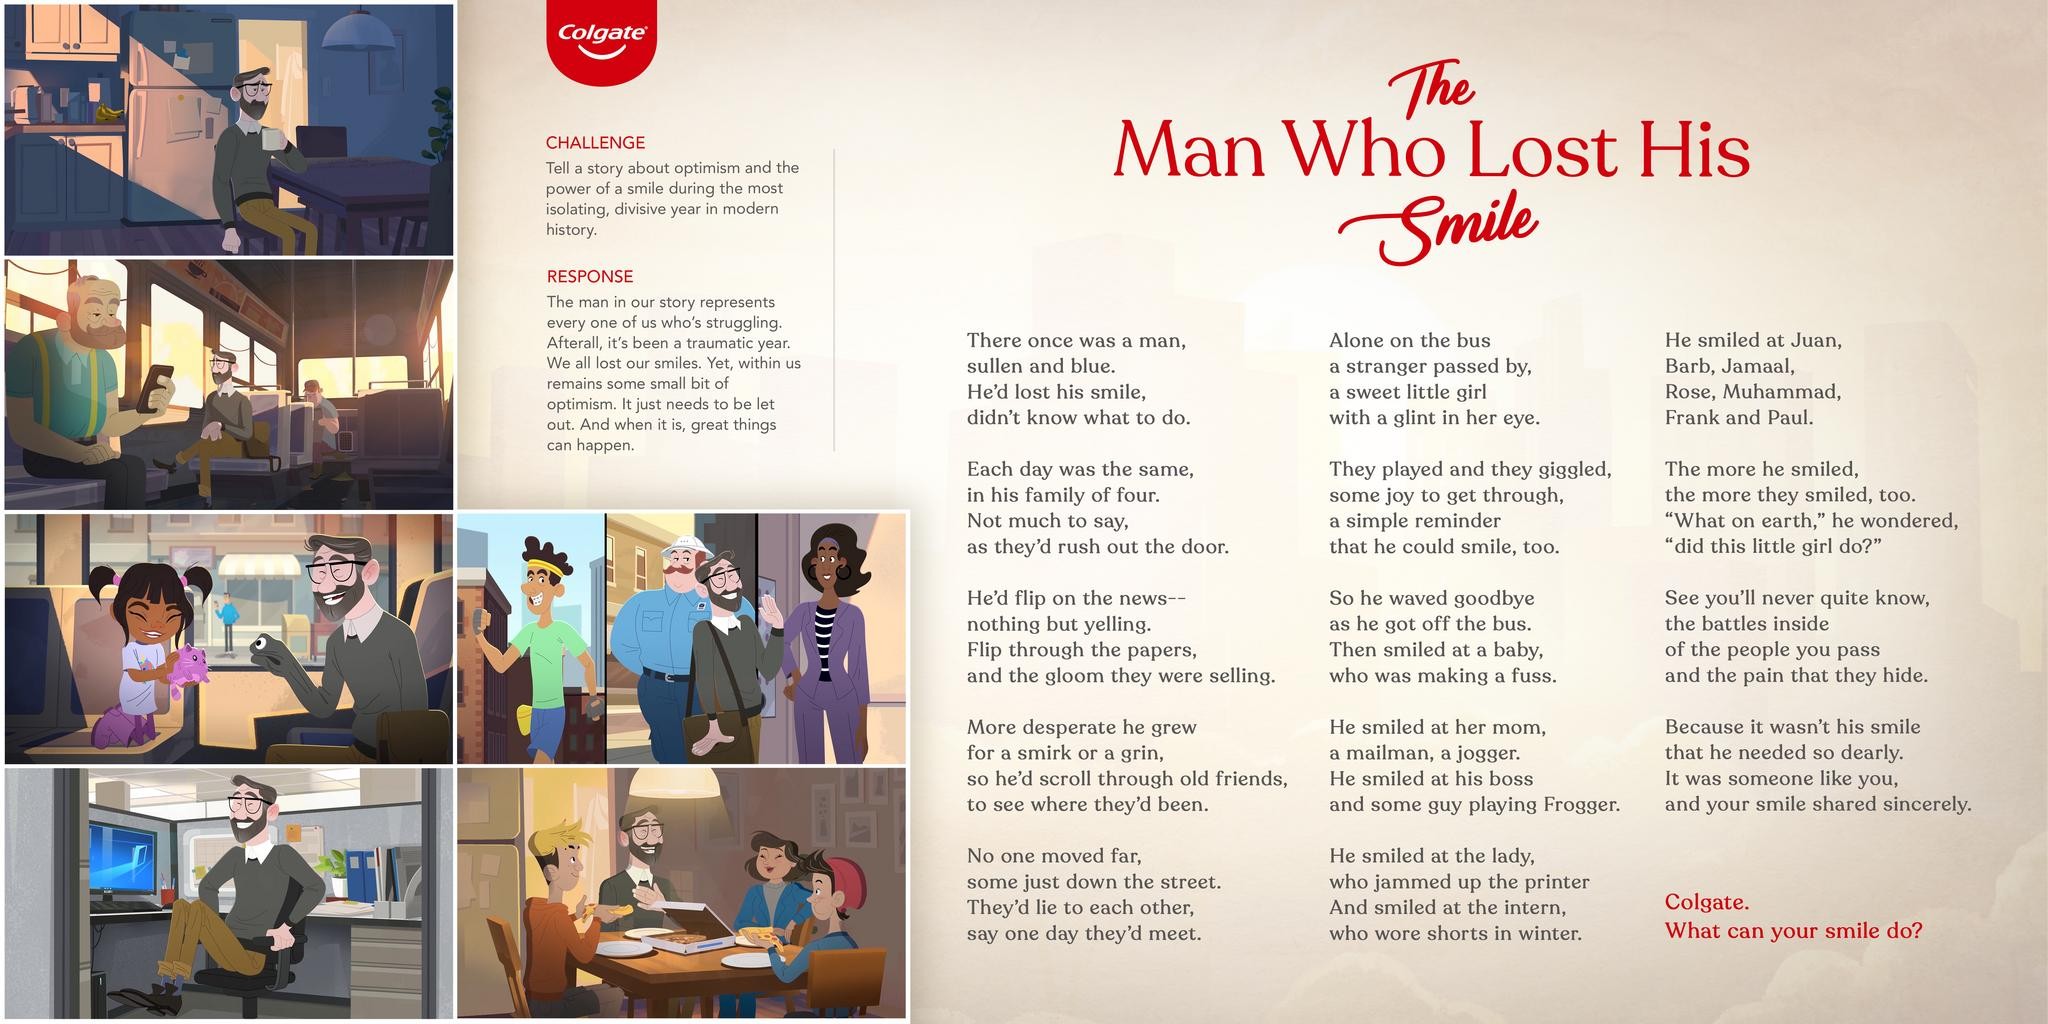 The Man Who Lost His Smile